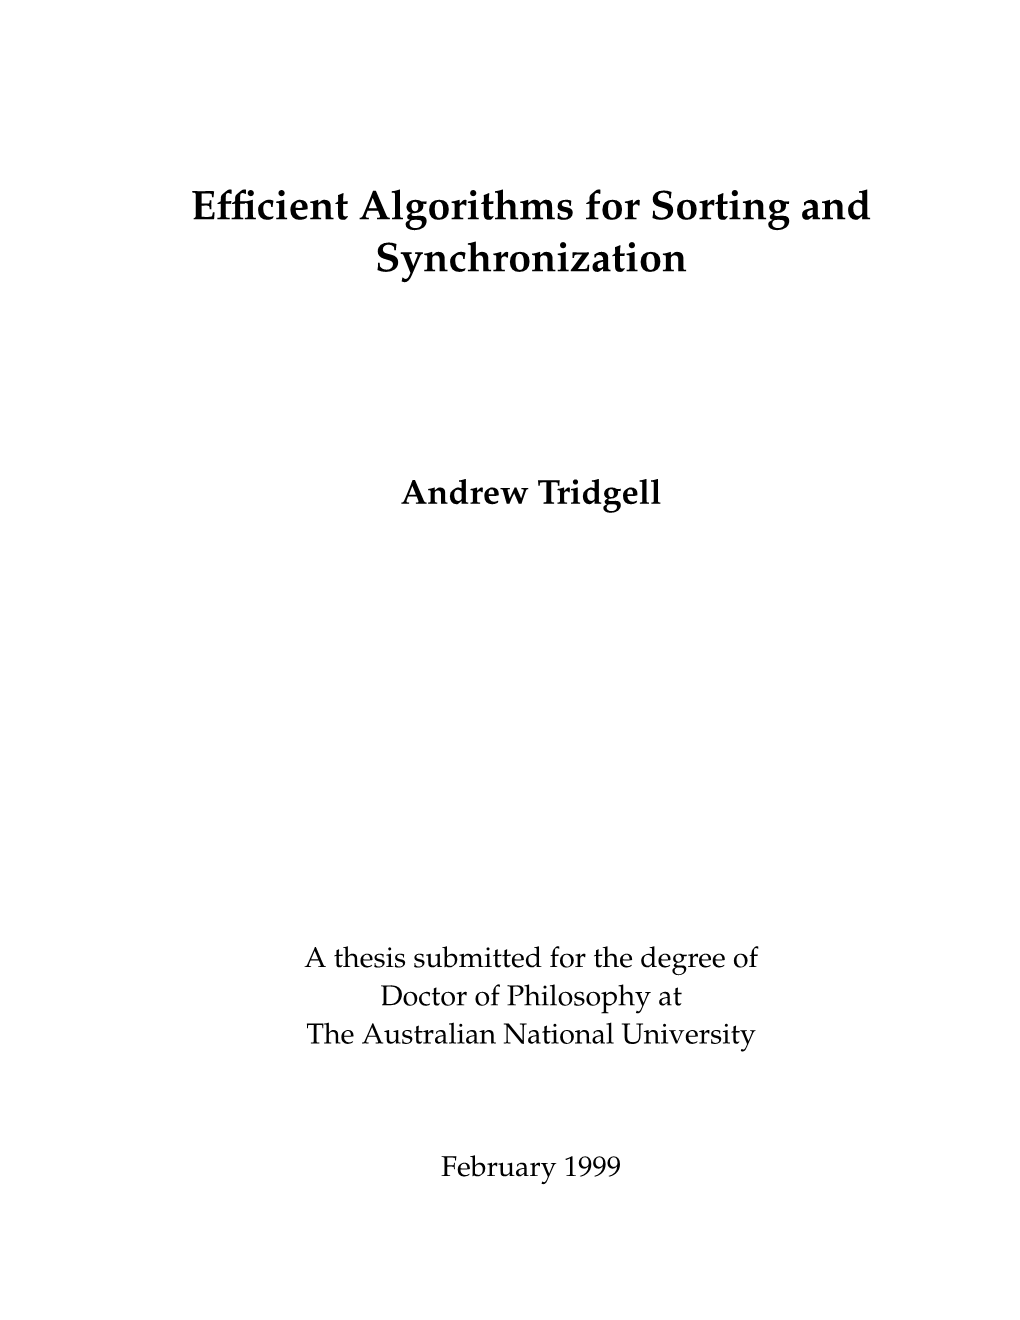 Thesis Submitted for the Degree of Doctor of Philosophy at the Australian National University